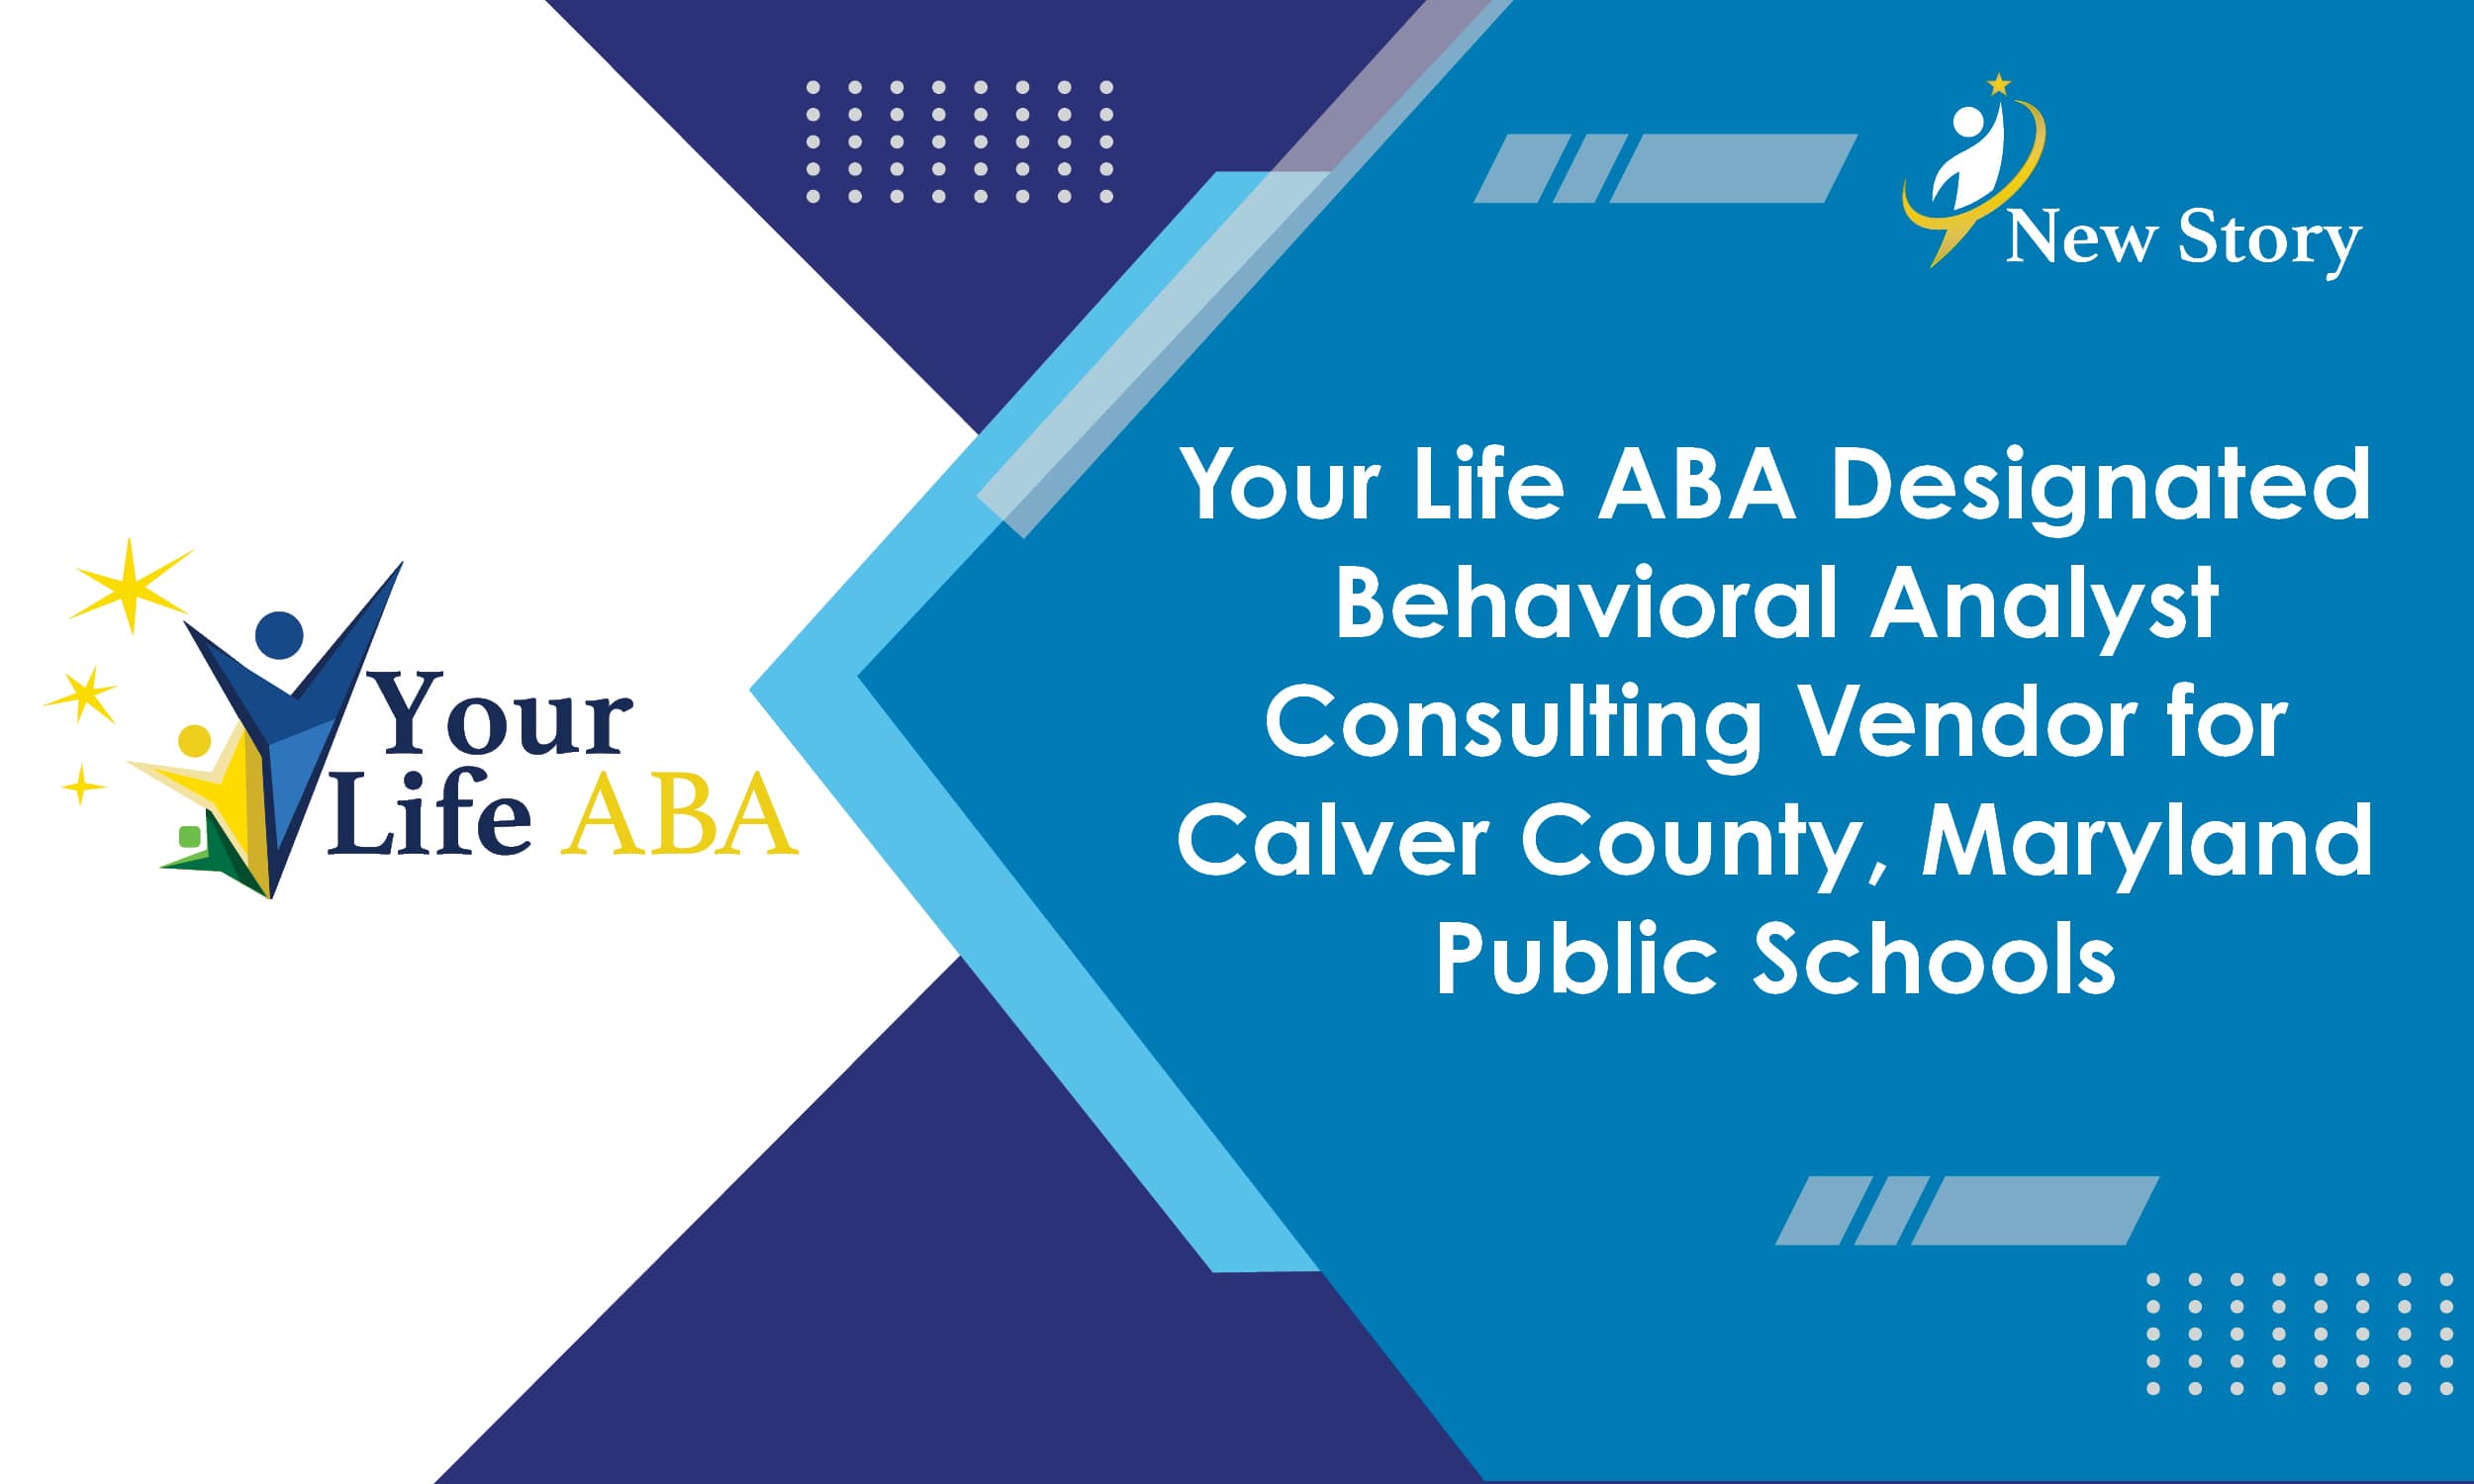 Your Life ABA, a New Story company, Designated Behavioral Analyst Consulting Vendor for Calver County, Maryland Public Schools